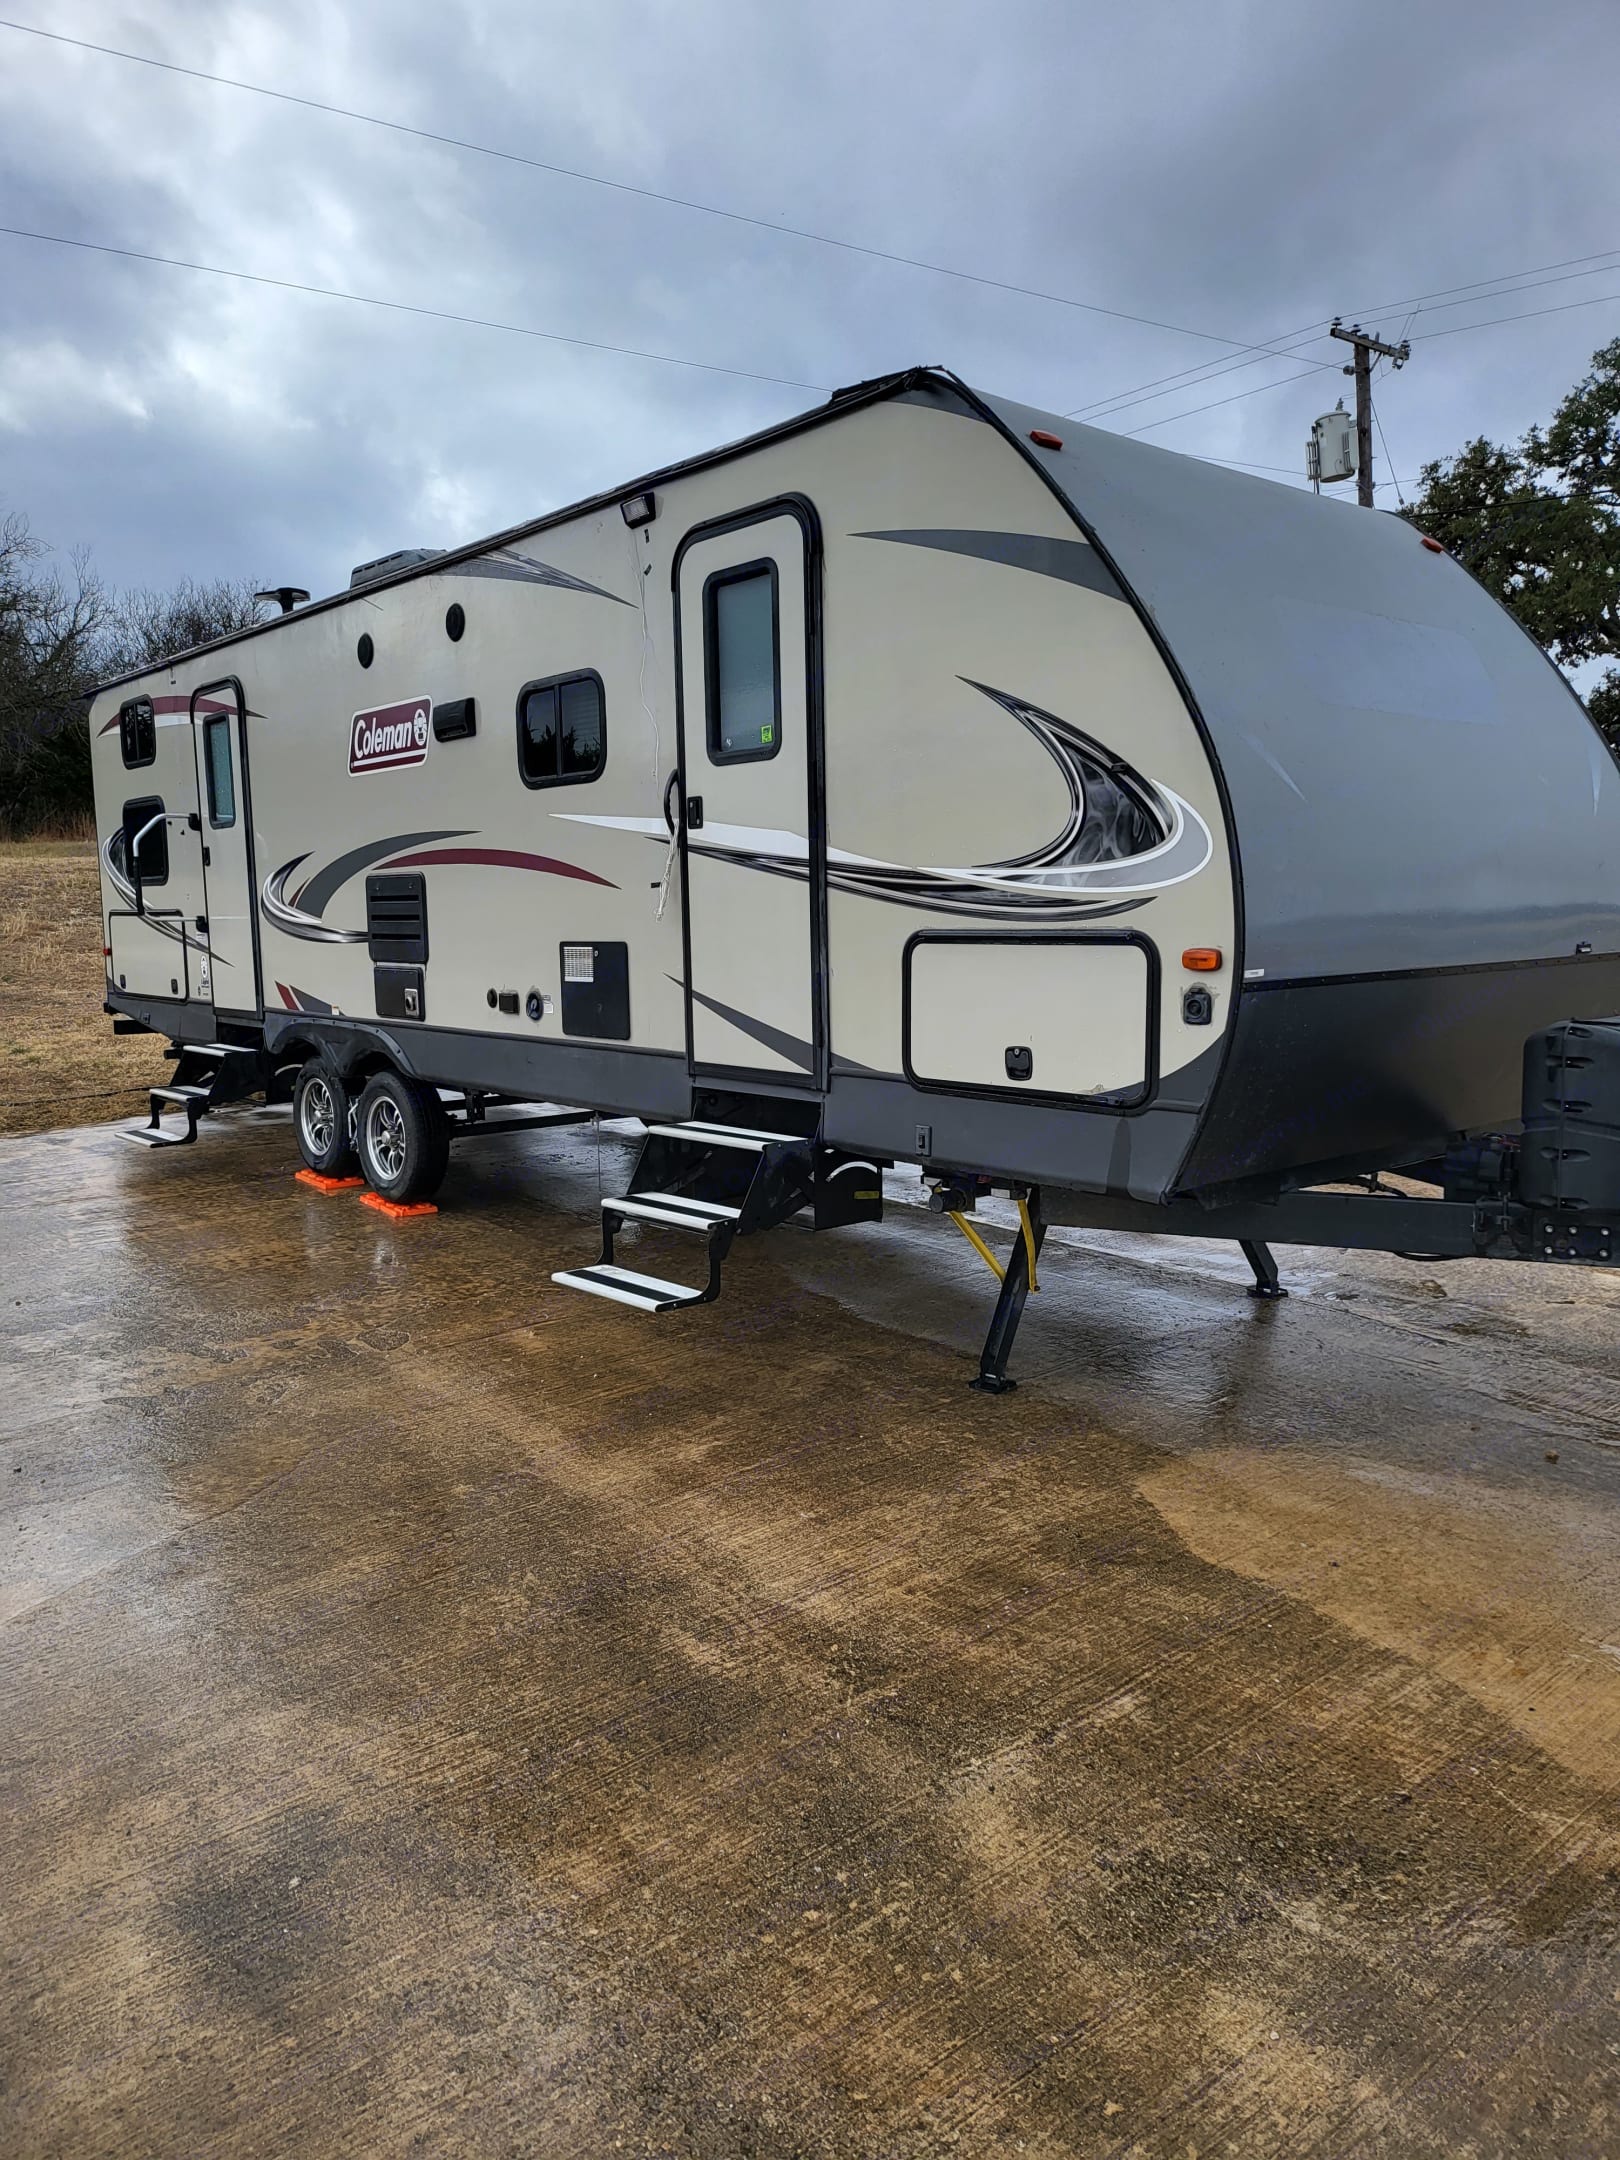 Current photo of RV 3/8/22
Unit does not have an awning.
Has two outdoor porch lights.. Other Other 2018